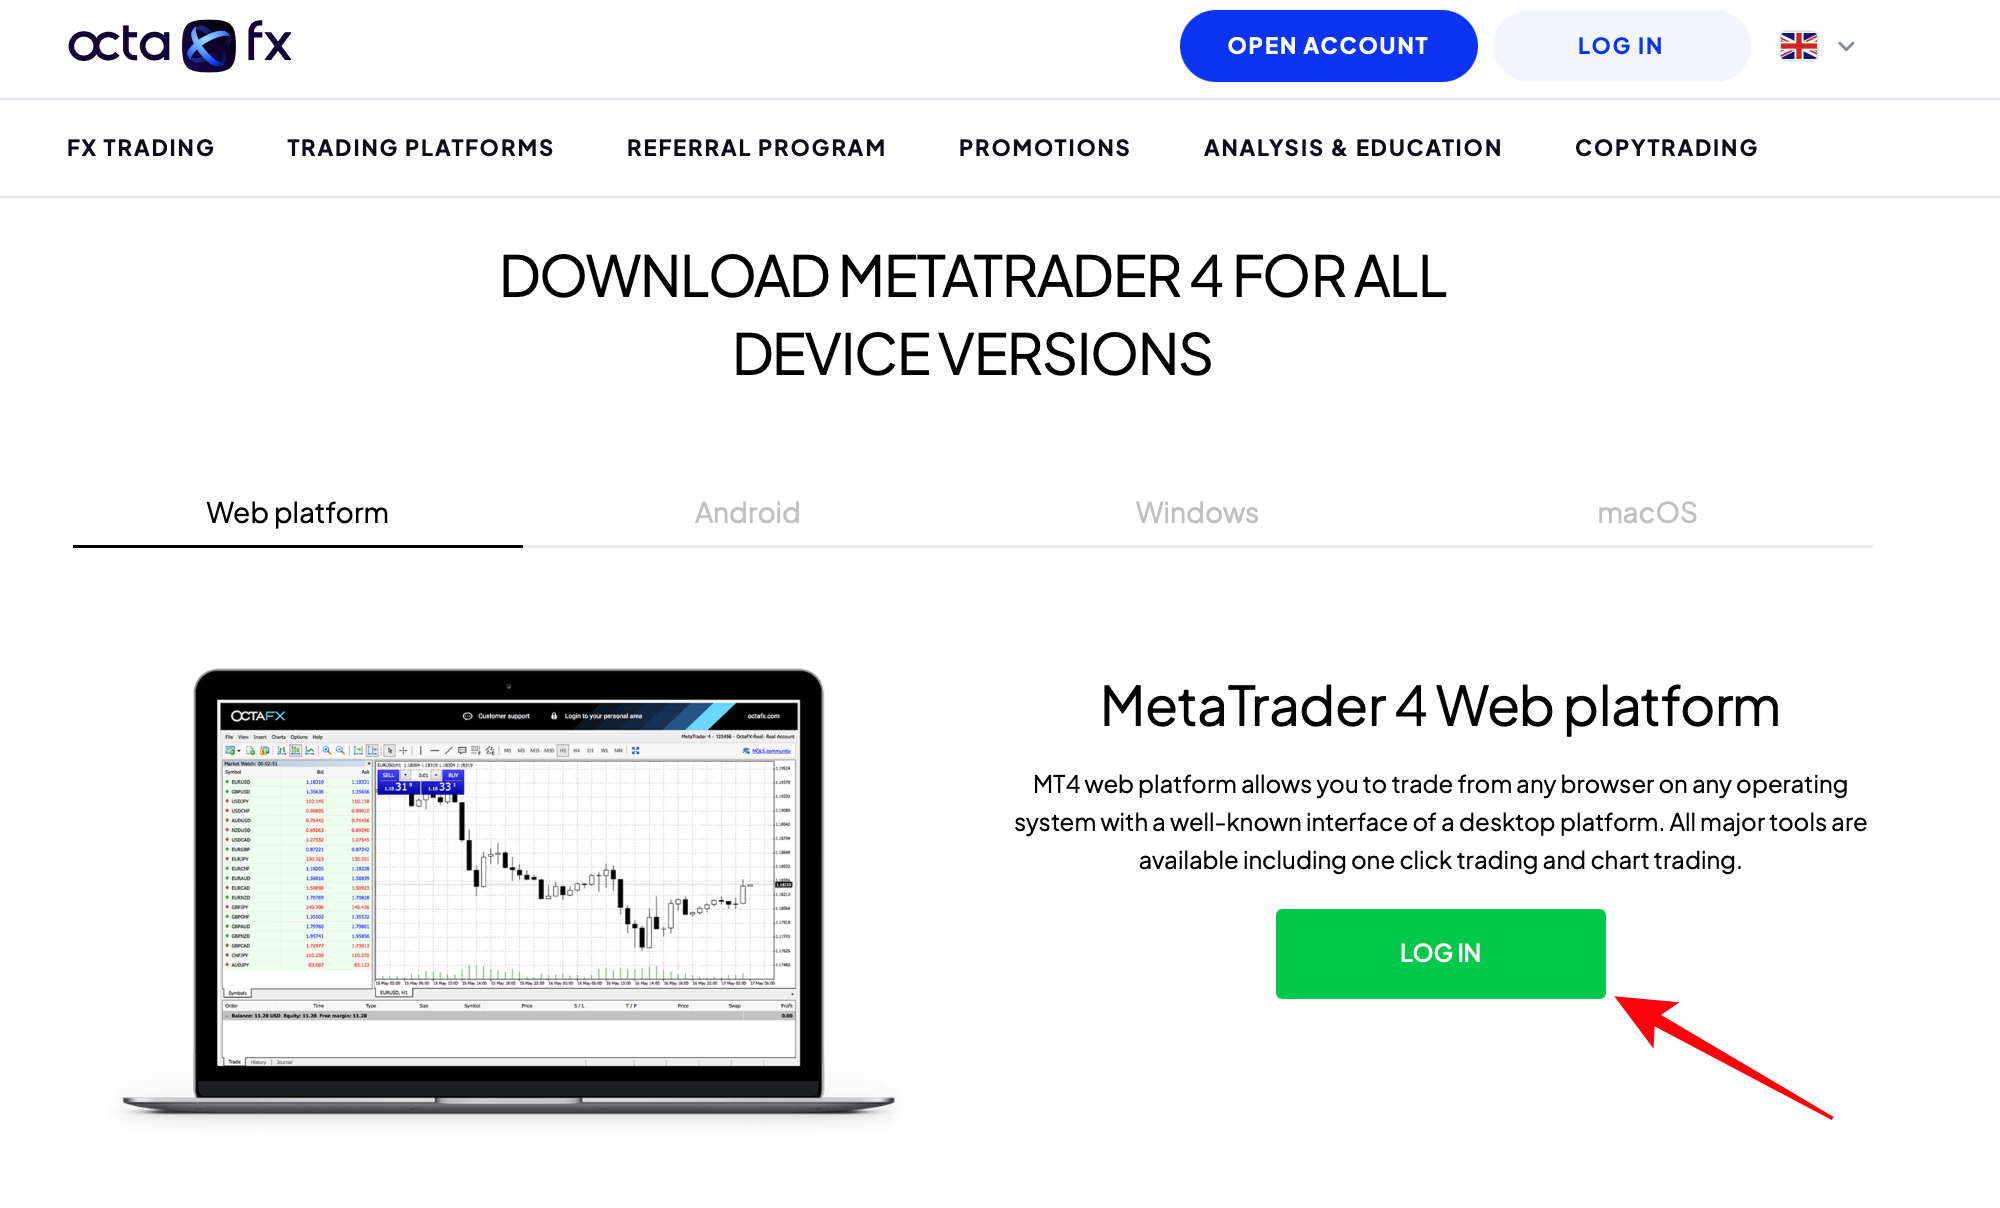 How to use the MetaTrader 4 on OctaFx